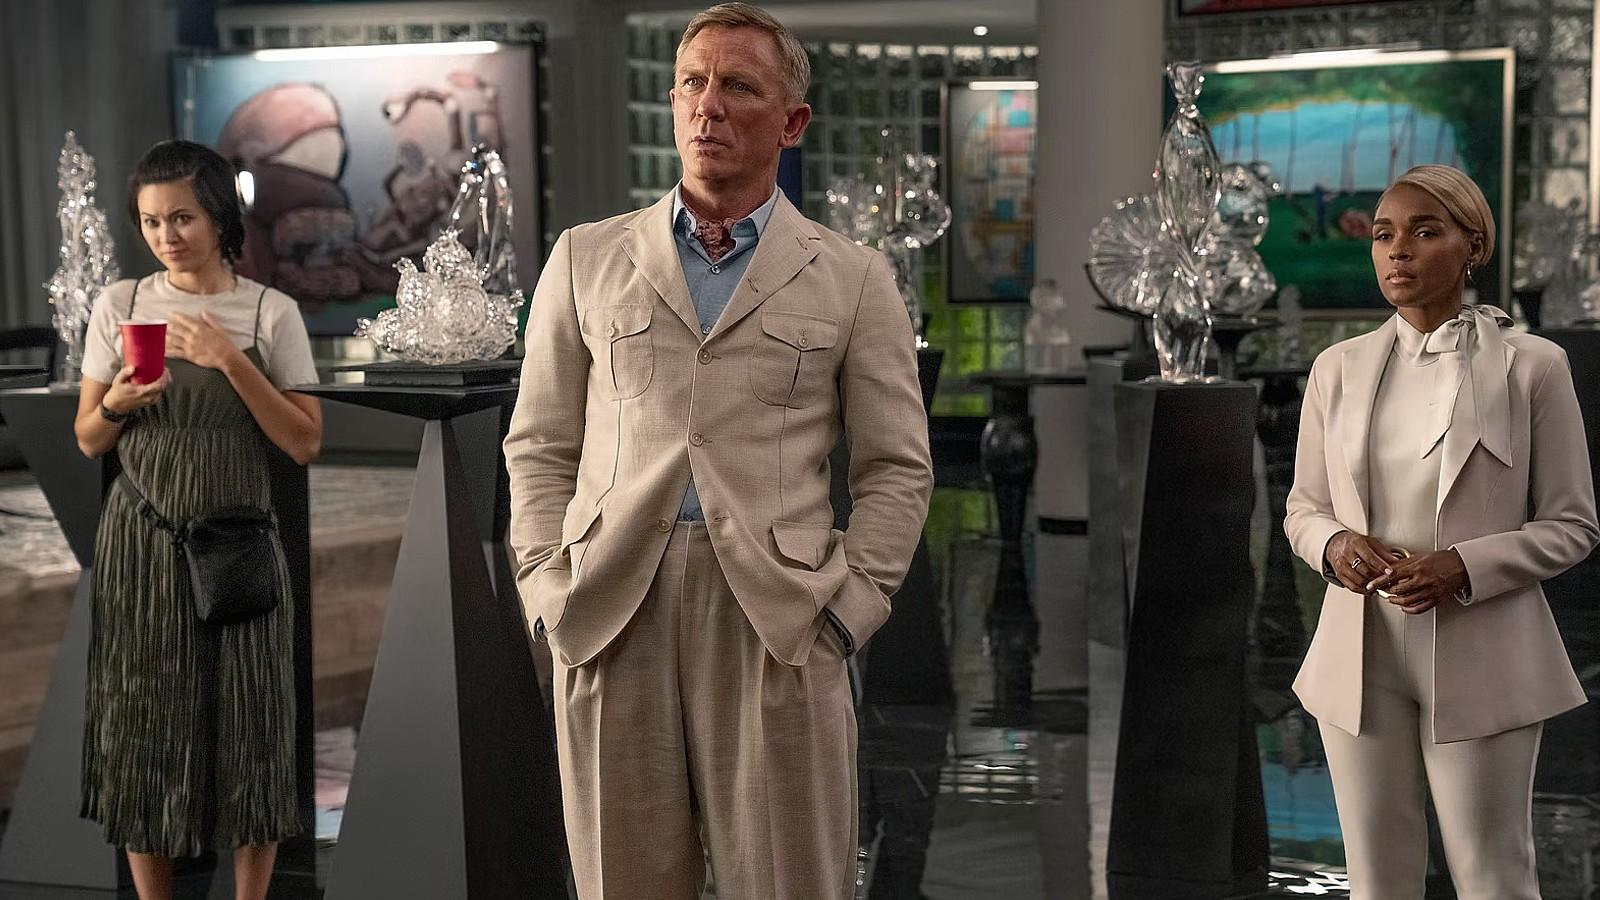 Daniel Craig in Glass Onion, the Knives Out sequel on Netflix